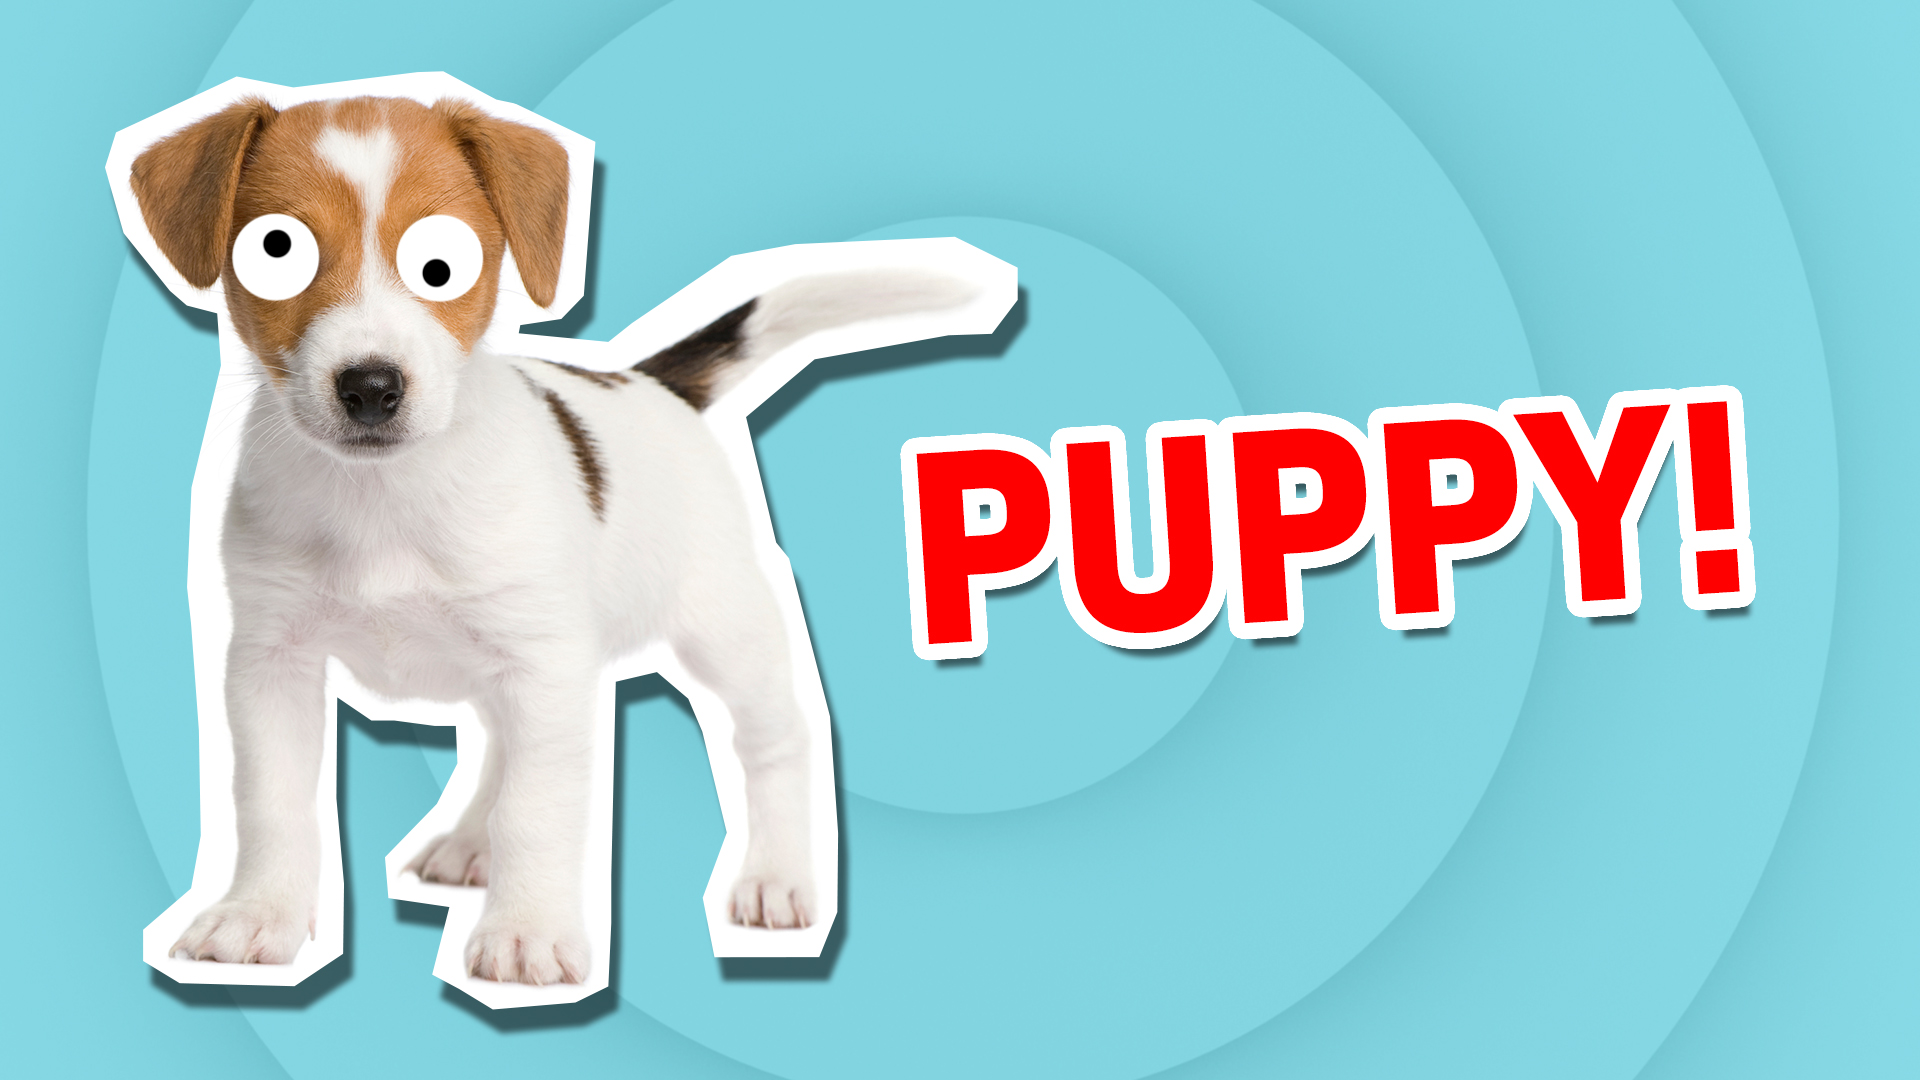 A puppy | What Cute Animal Are You?  | Which Cute Animal Are You?